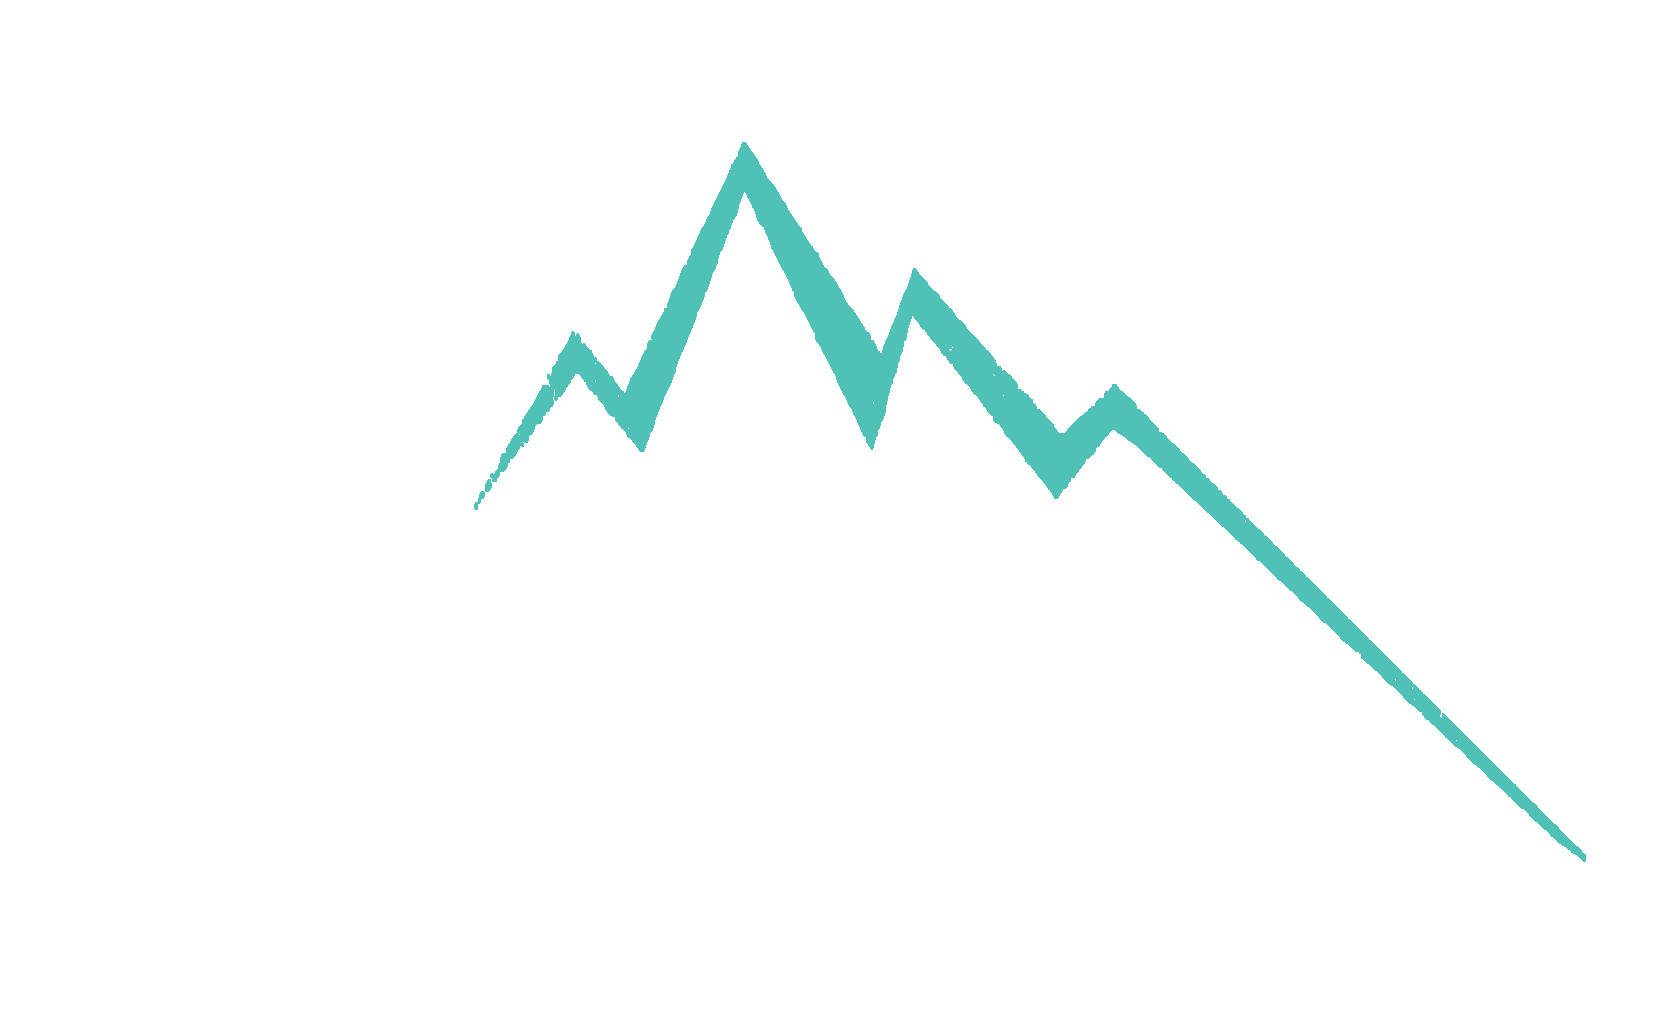 THE TOP